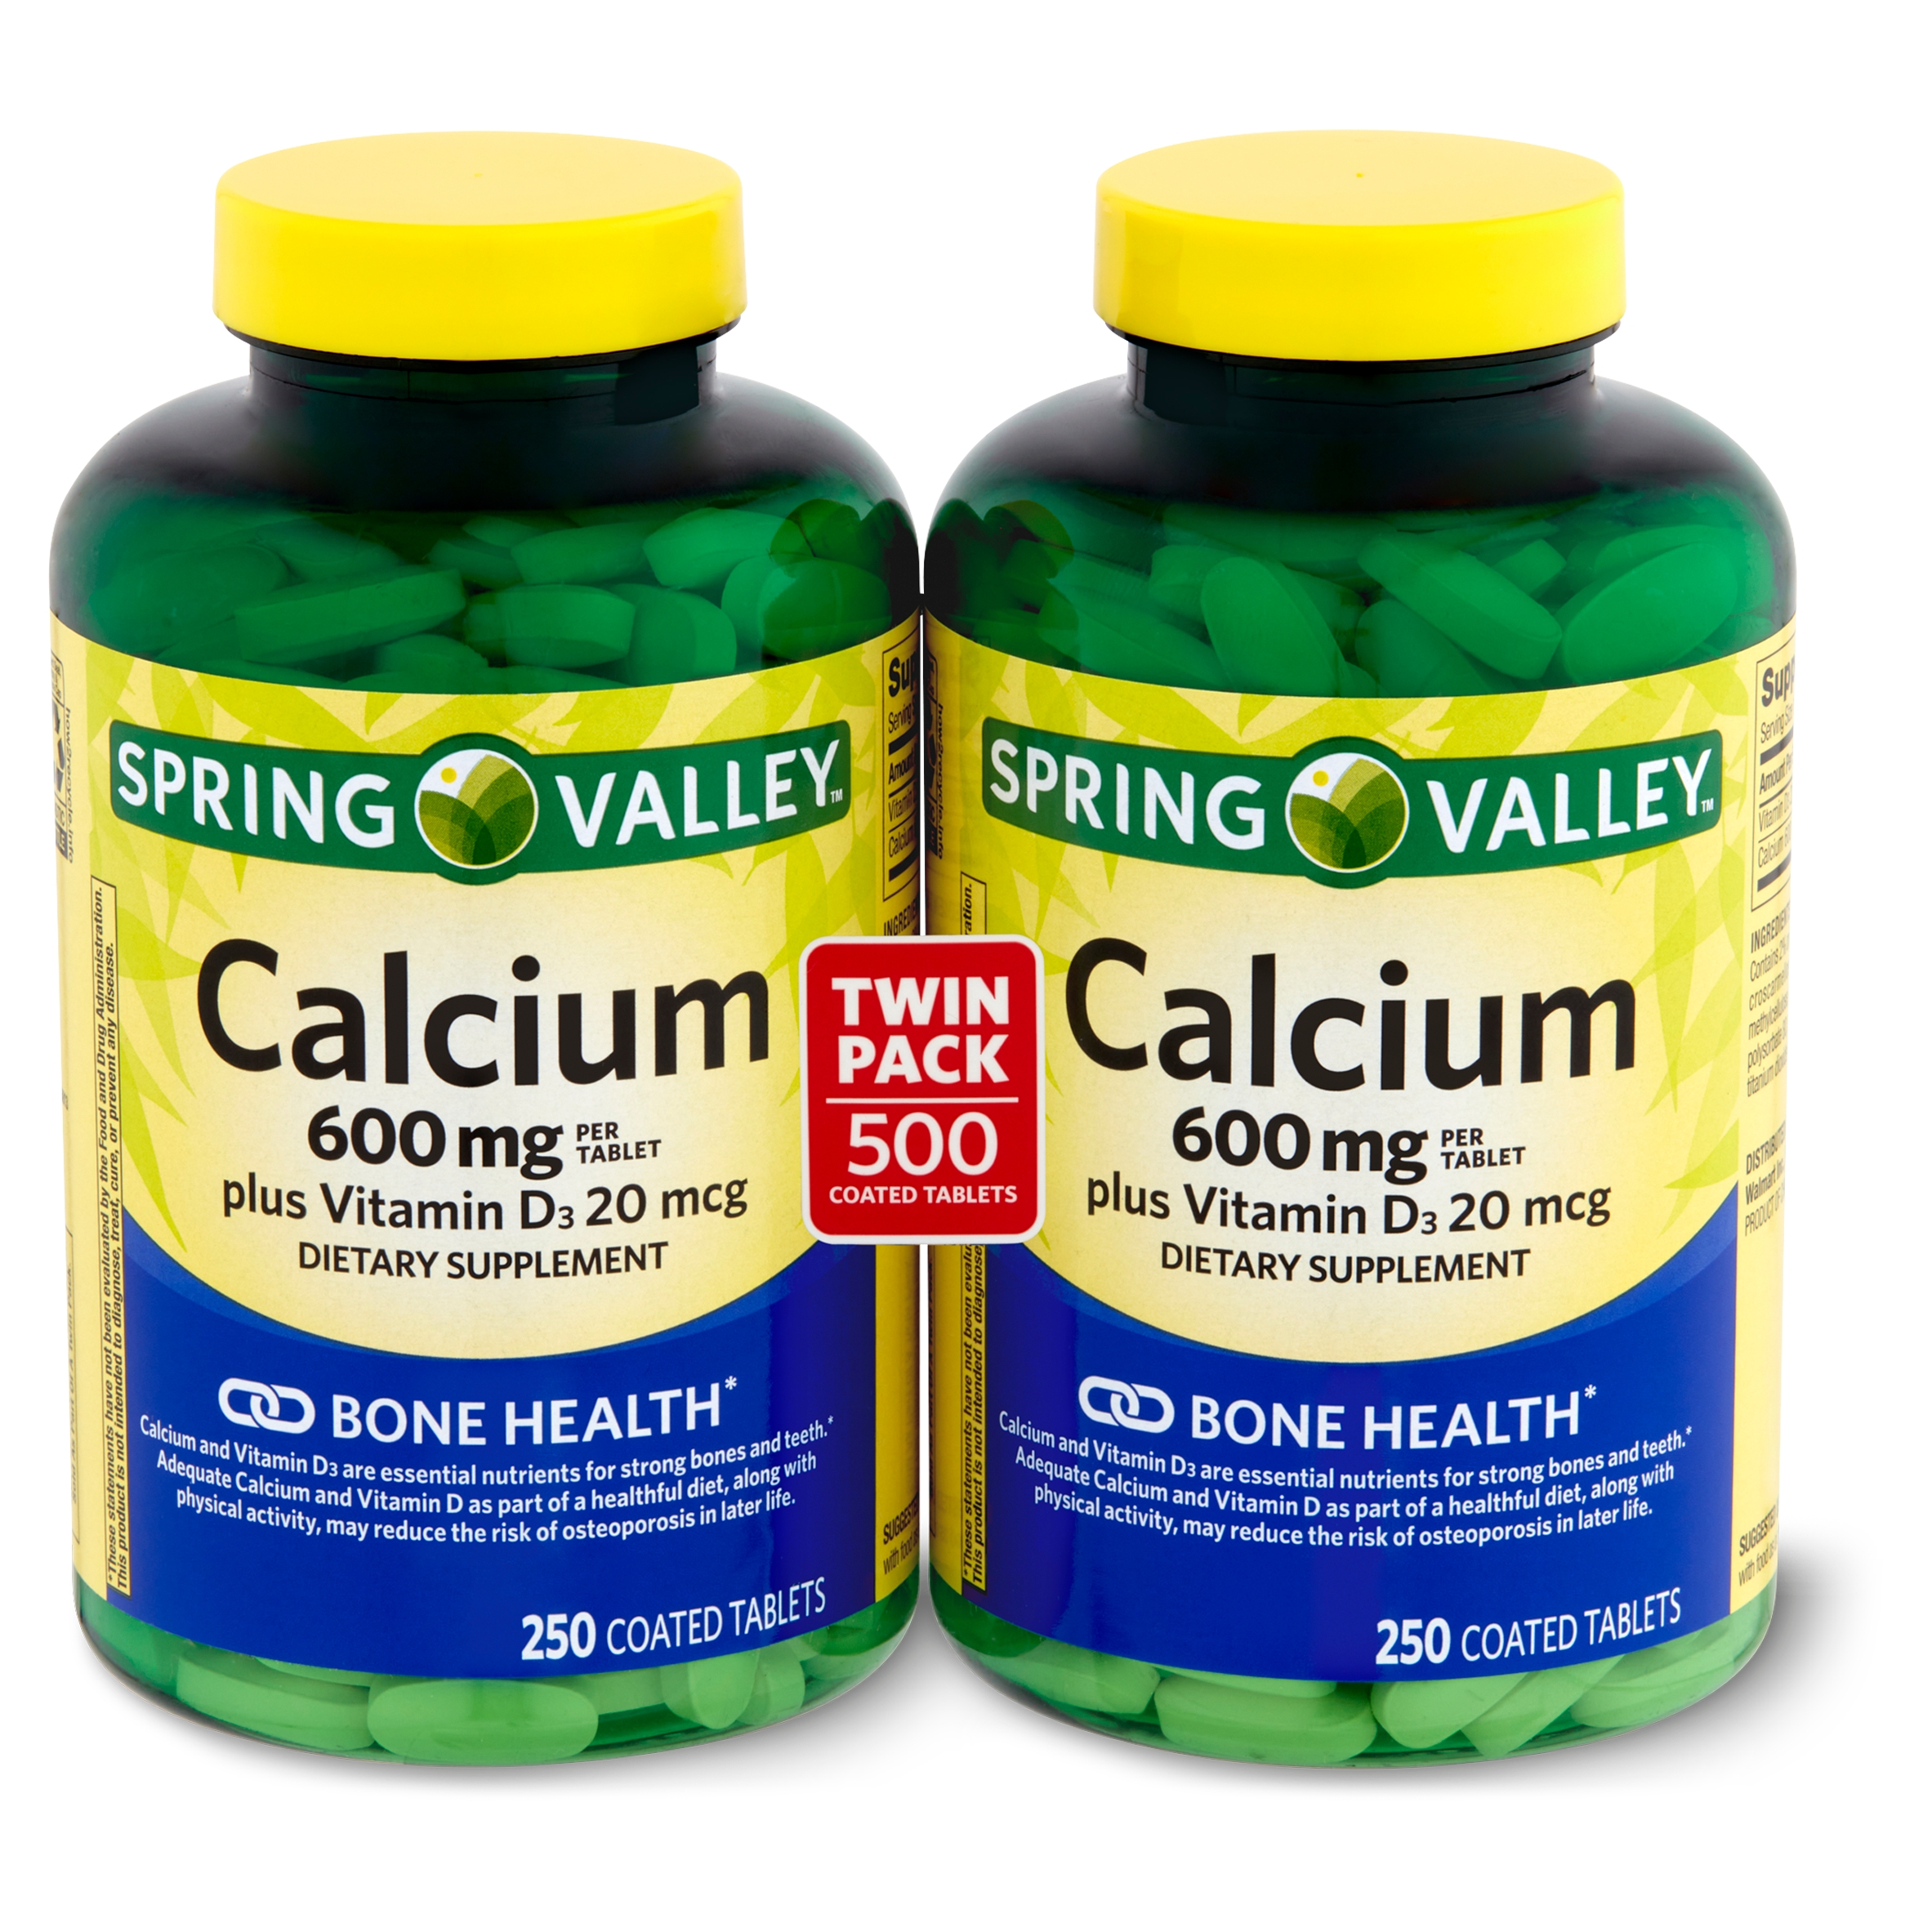 Spring Valley Calcium Plus Vitamin D3 Dietary Supplement, 600 mg, 250 Count, 2 Pack - image 3 of 9